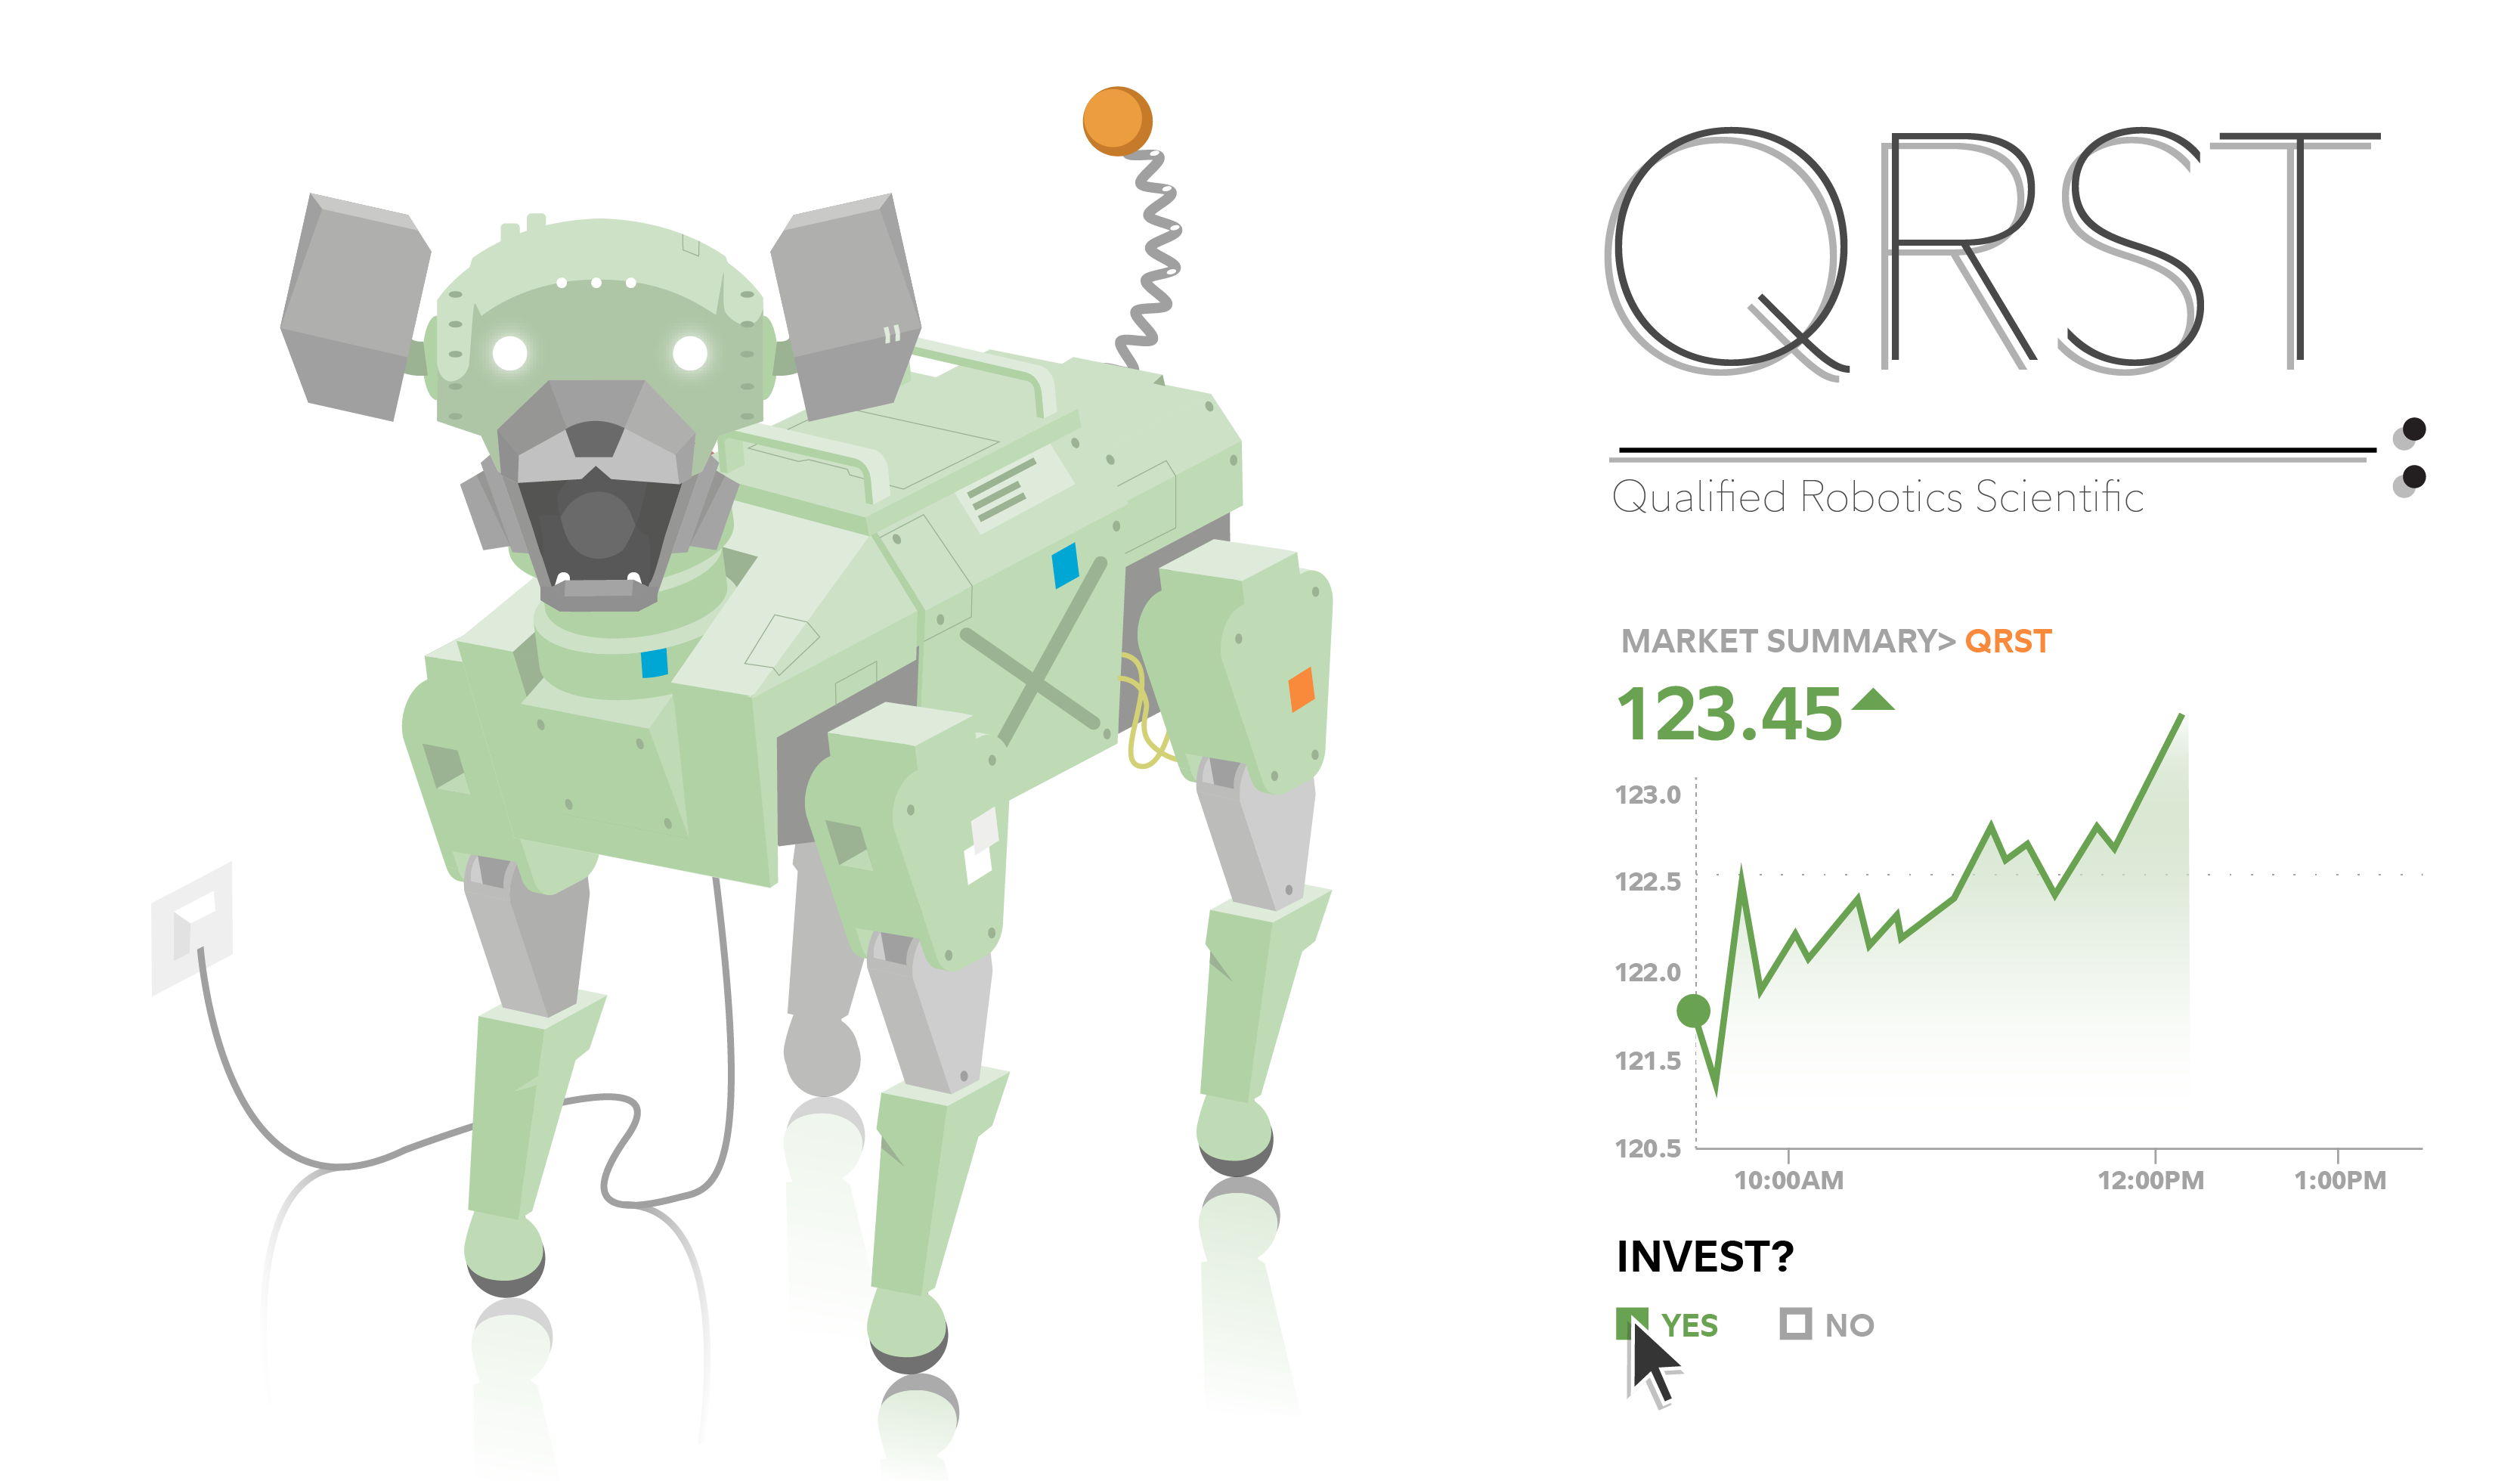 Image of a robot dog next to a chart about Qualified Robotics Scientific